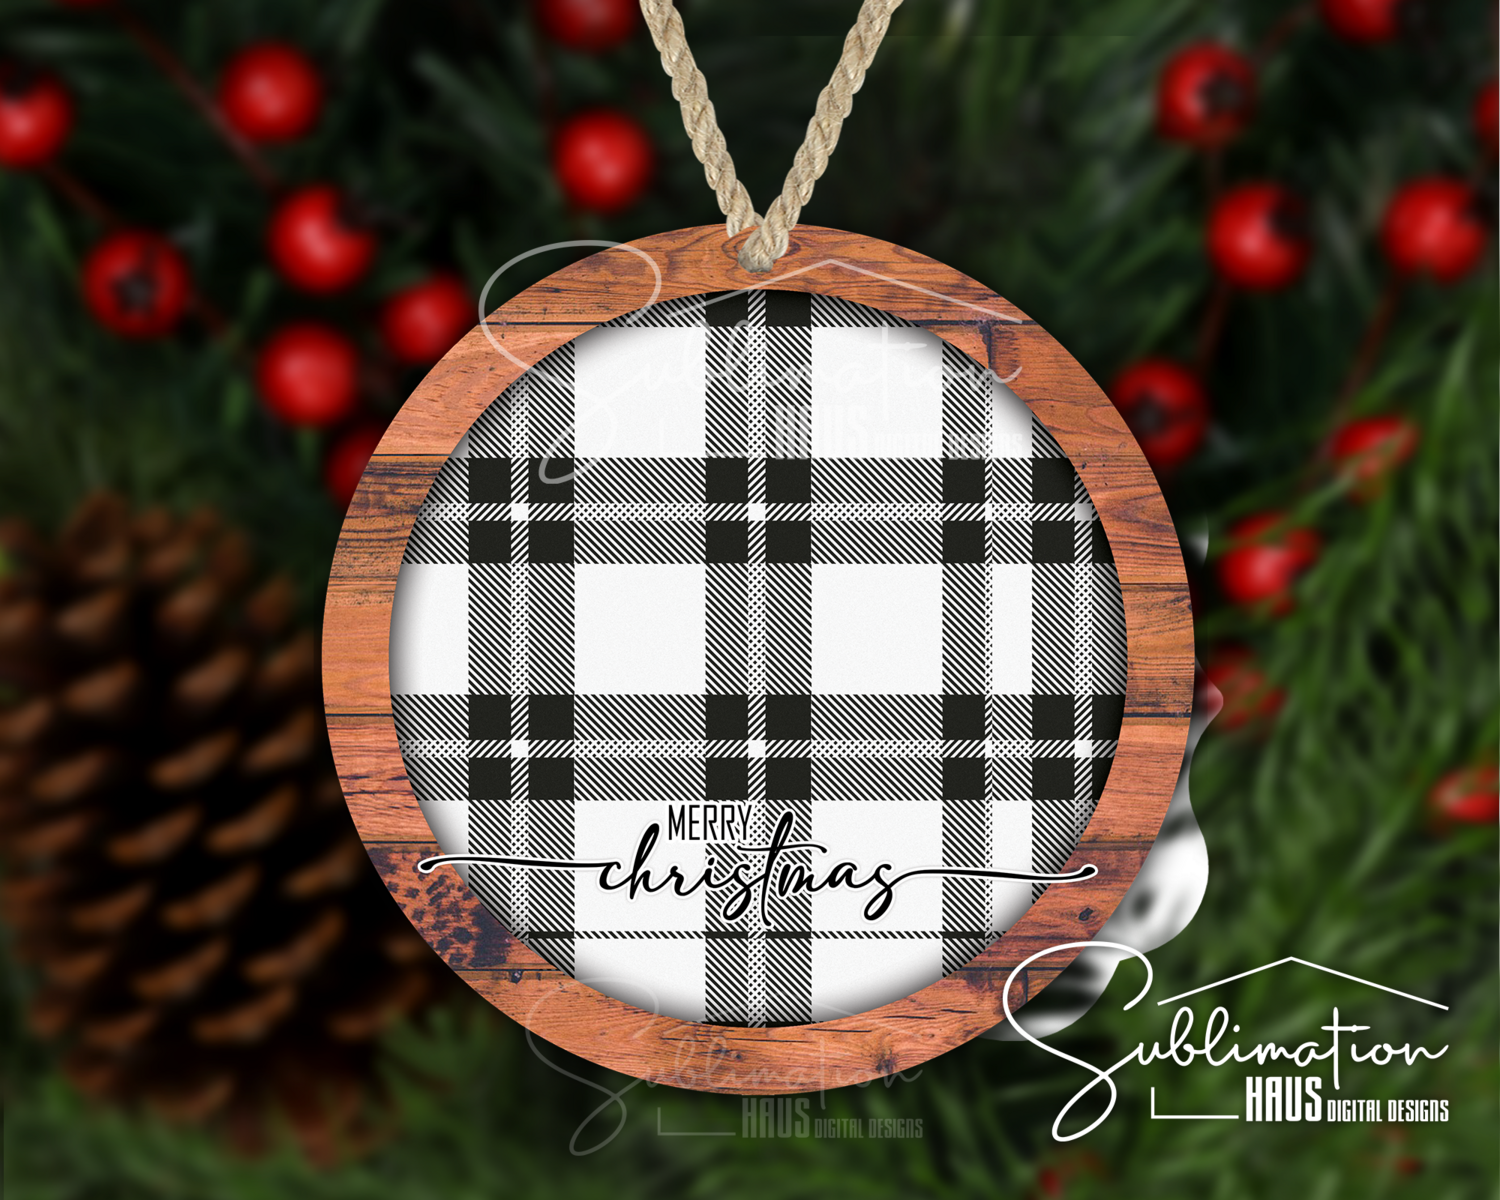 Wood Round Plaid Ornament- Winter Holiday Ornament